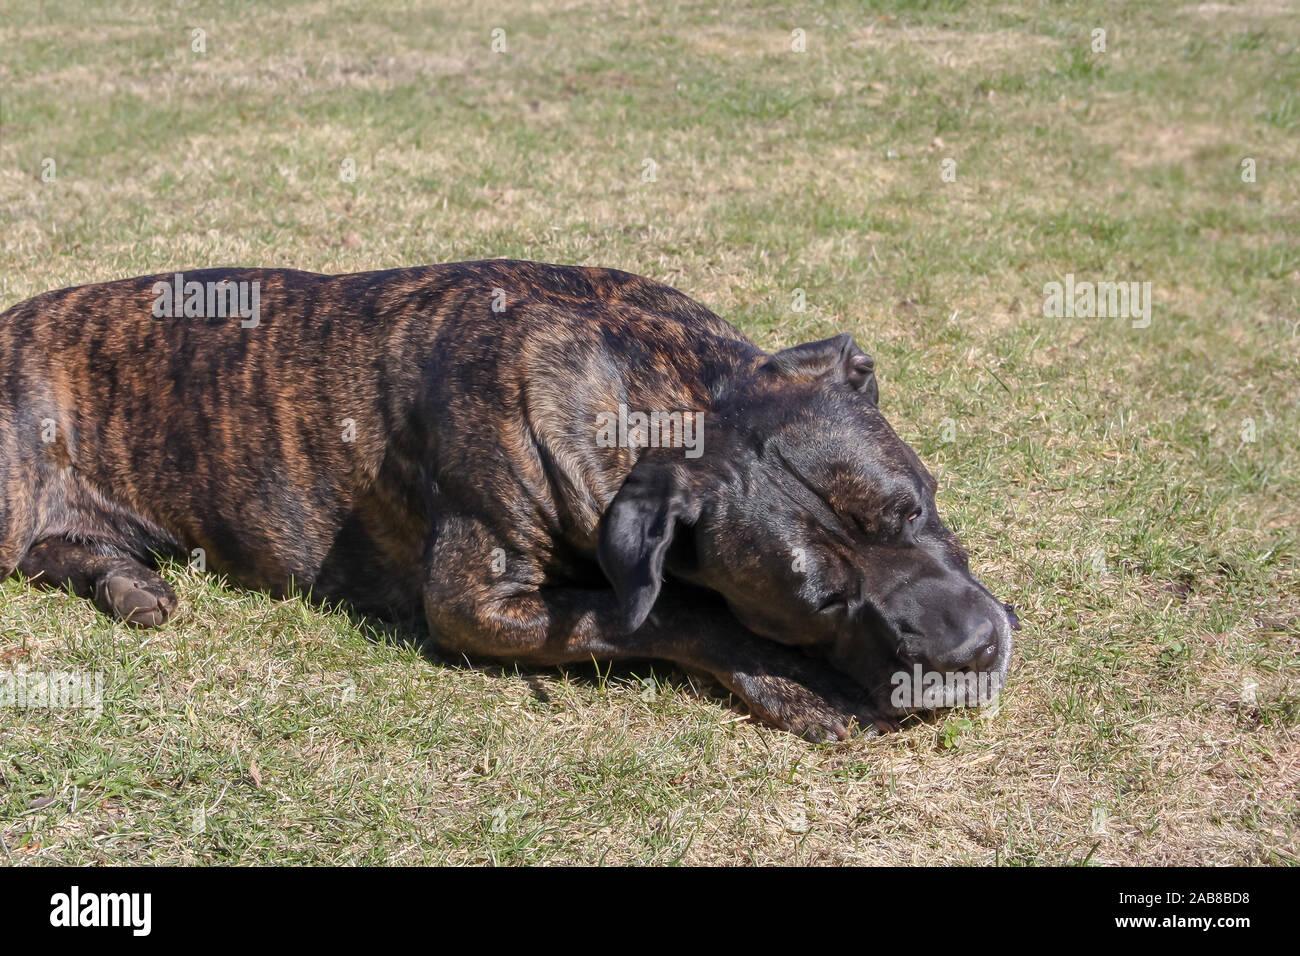 A new cane corso dog sleeps in the sunshine outside Stock Photo